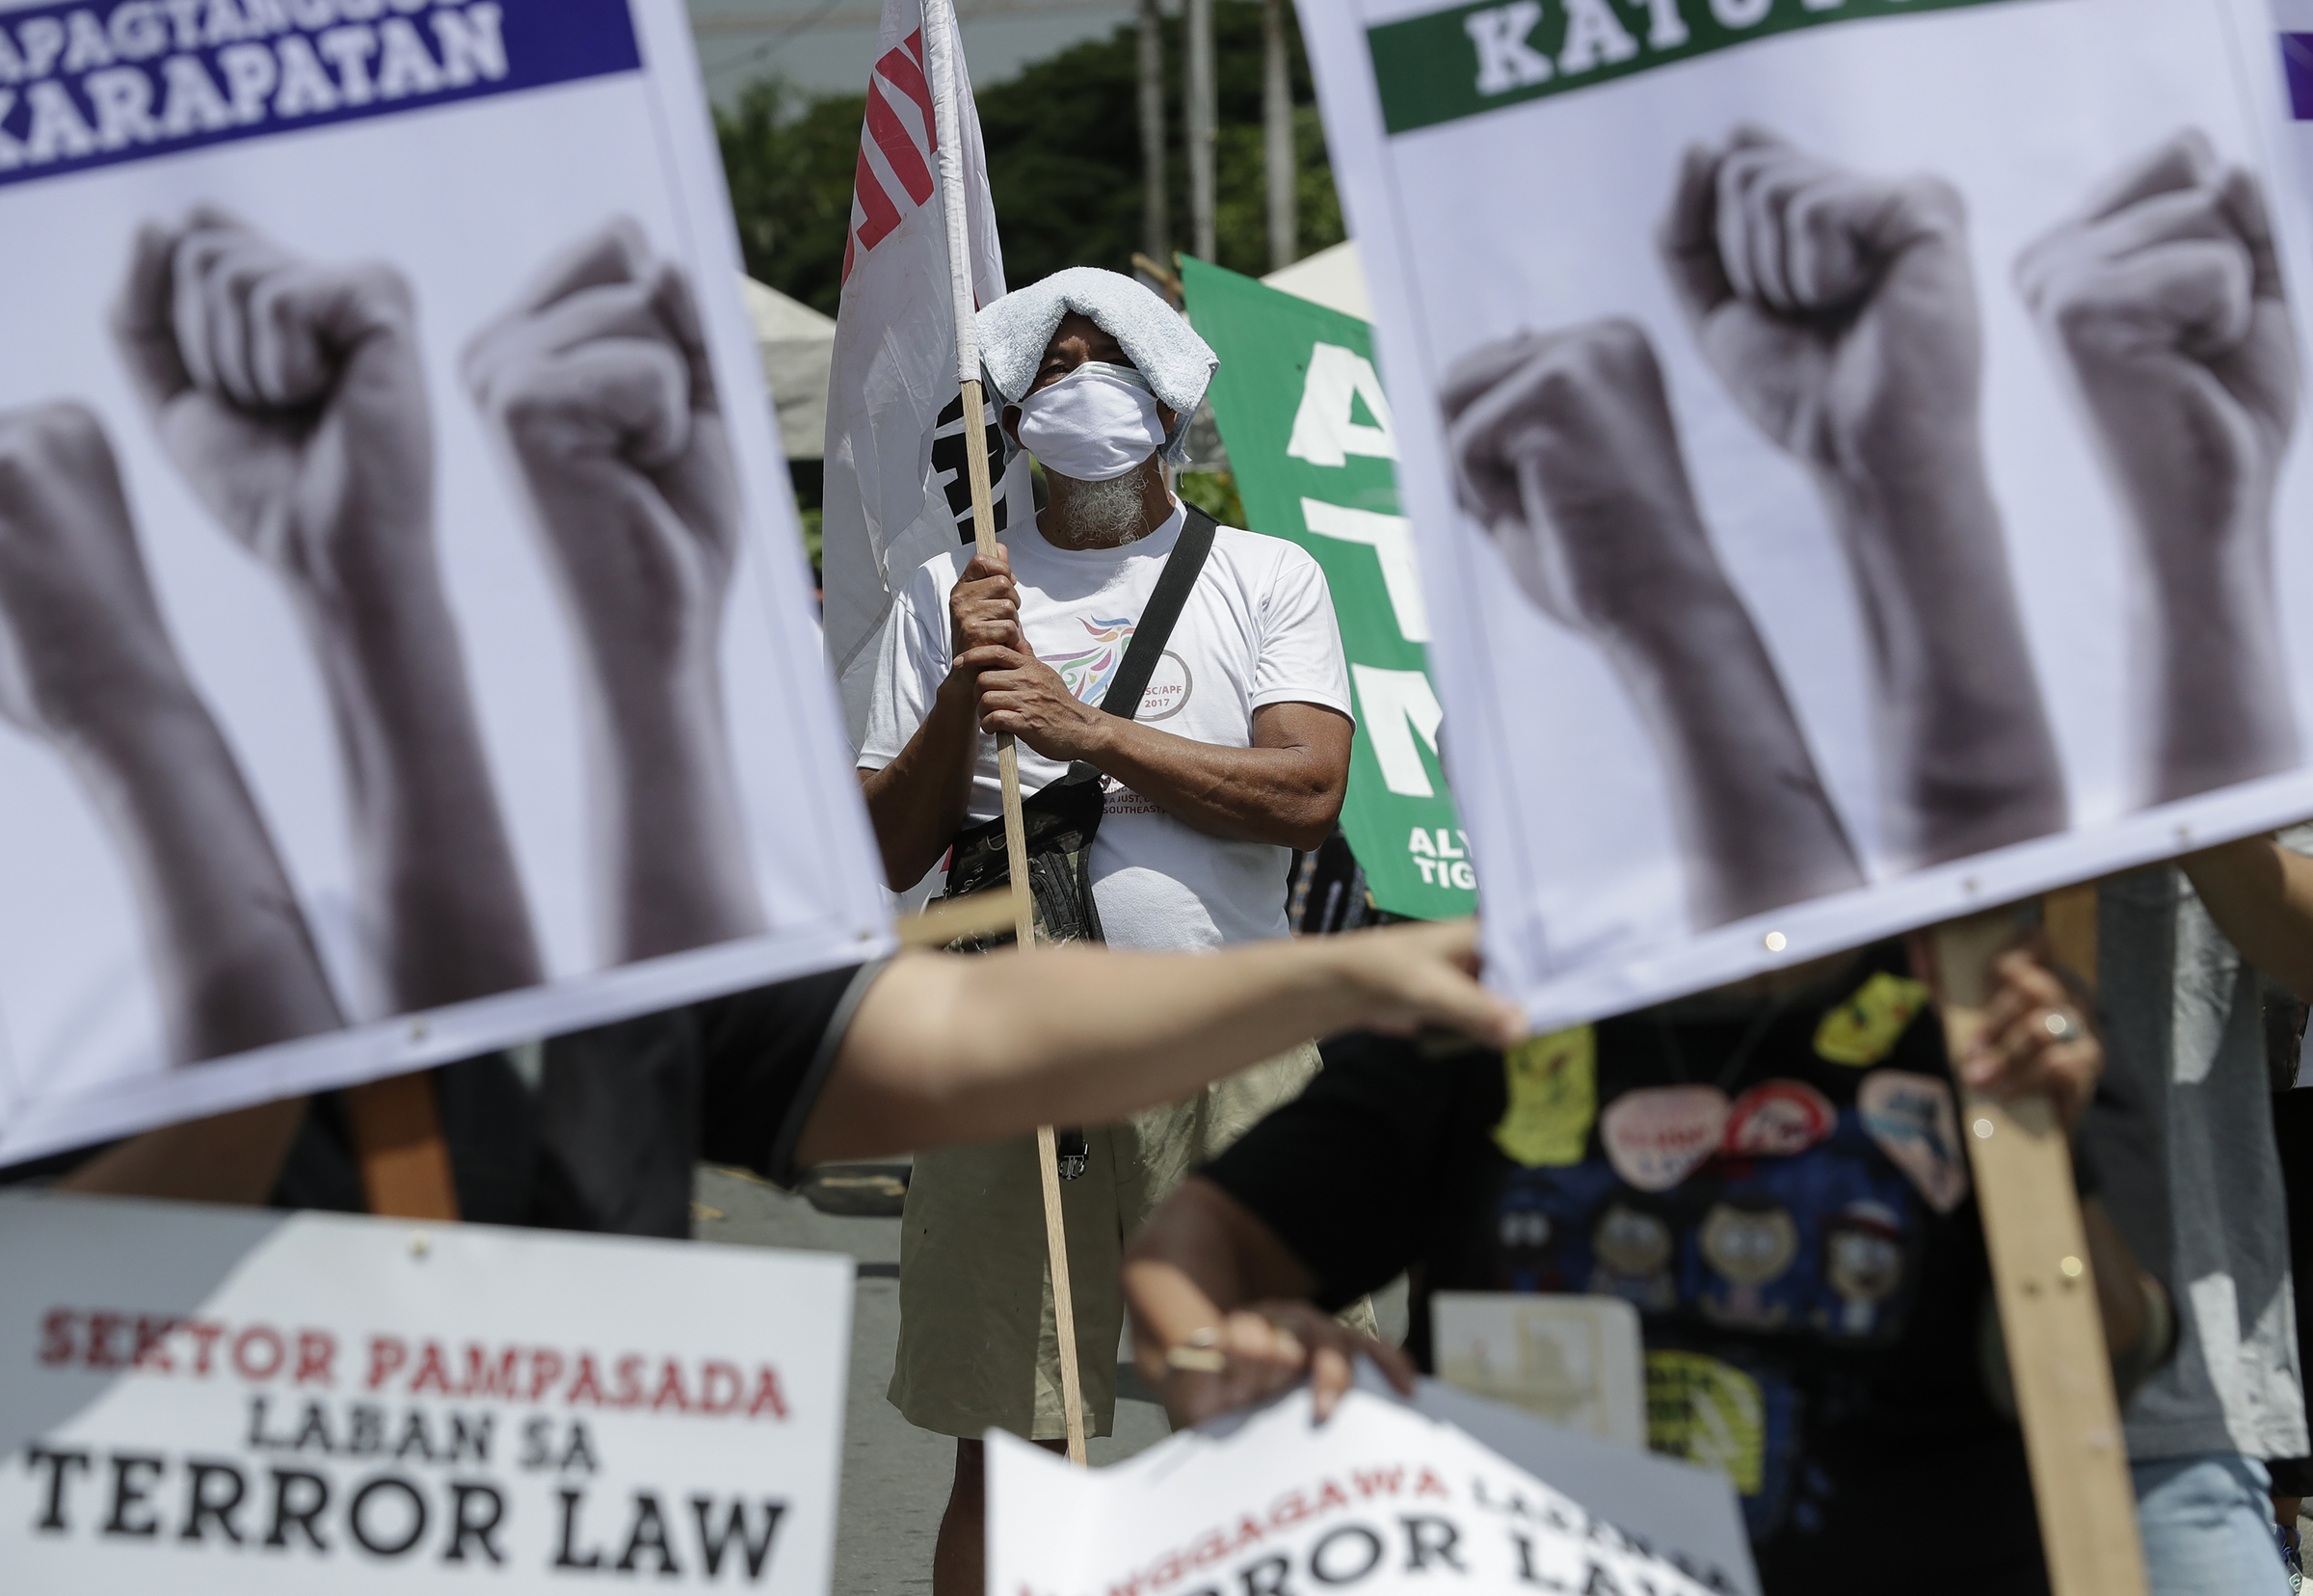 A man stands beside slogans during a rally against the anti-terror law at the University of the Philippines in Manila, Philippines on Tuesday July 7, 2020. Philippine President Rodrigo Duterte recently signed a widely opposed anti-terror law which critics fear could be used against human rights defenders and to muzzle dissent. (AP Photo/Aaron Favila)